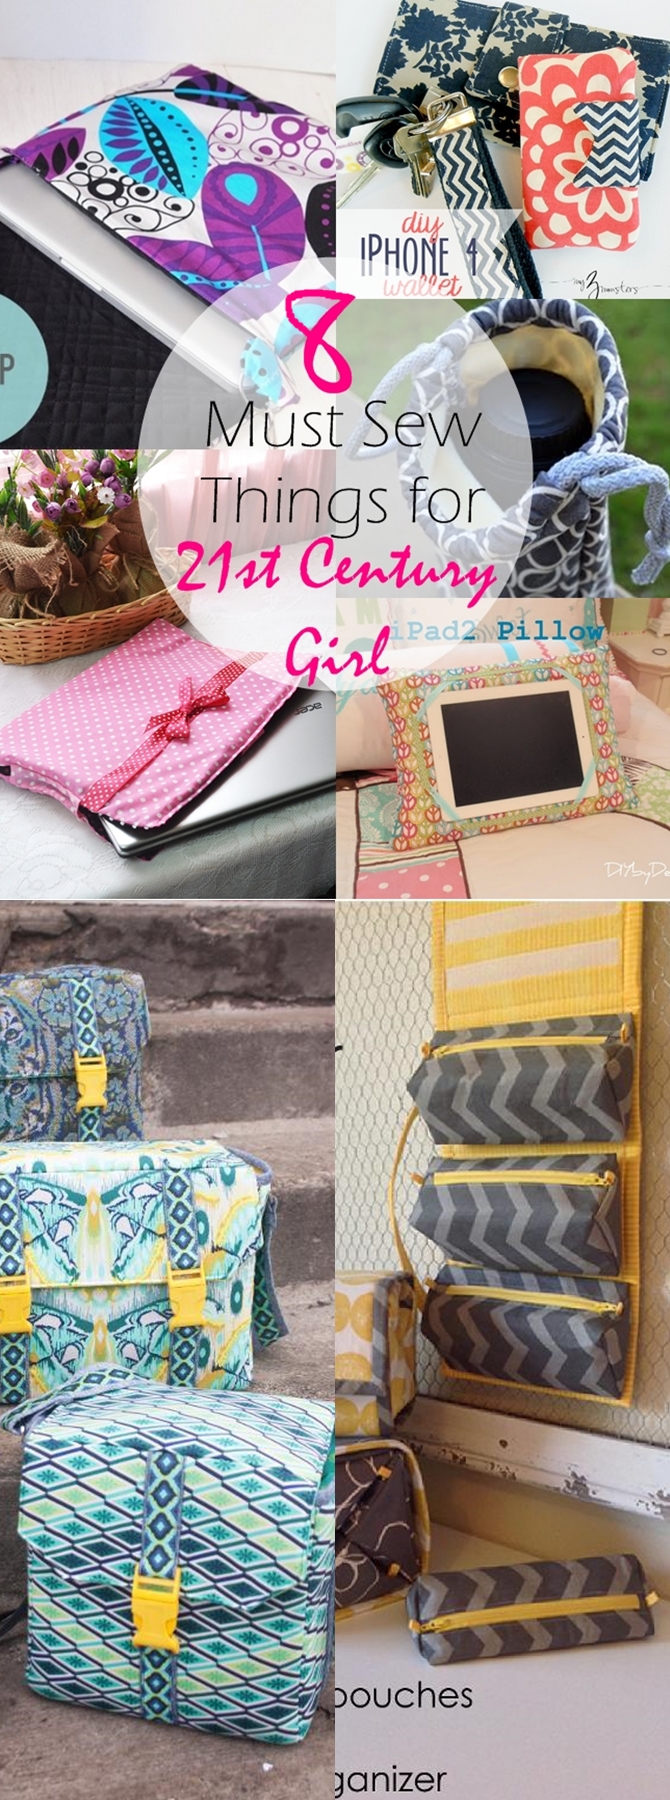 8 Must Sew Things for 21st Century Girl (Free Sewing Patterns)